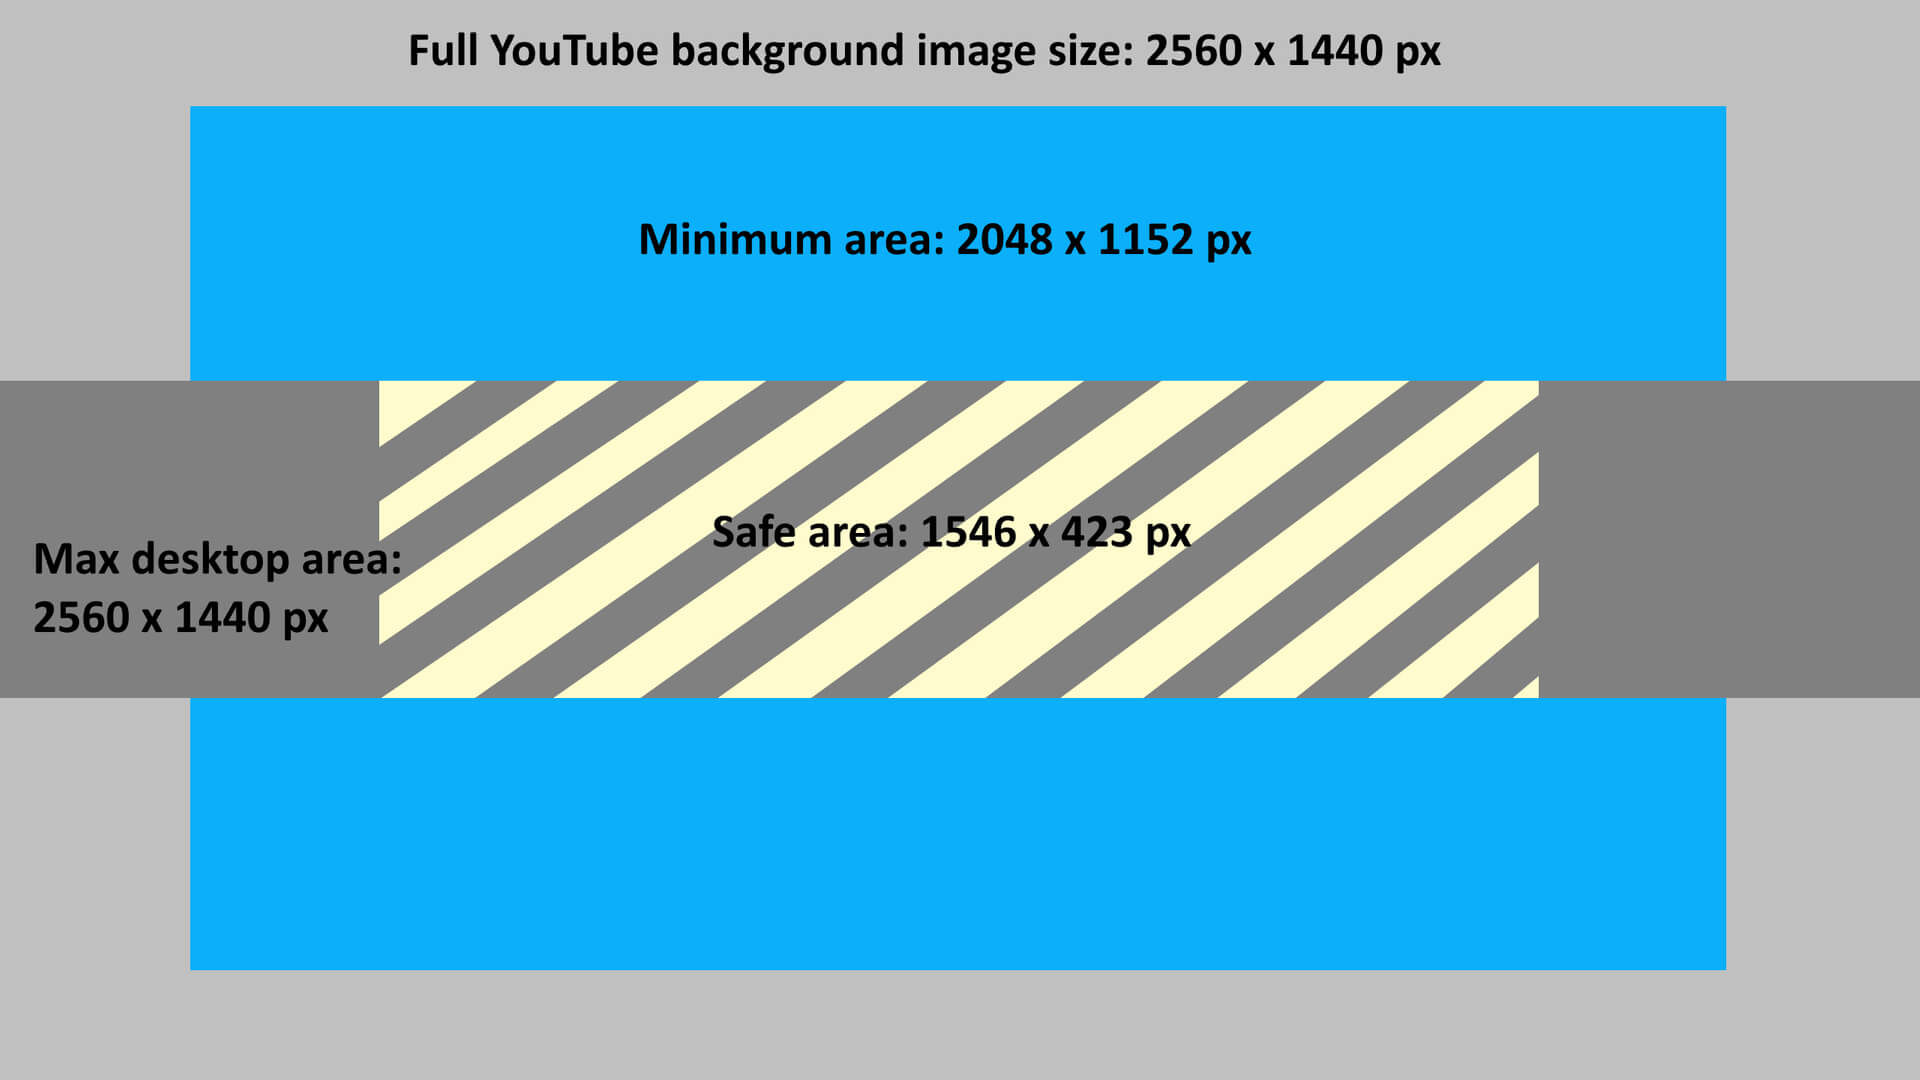 The Best Youtube Banner Size In 2019 + Best Practices For Inside Youtube Banner Size Template